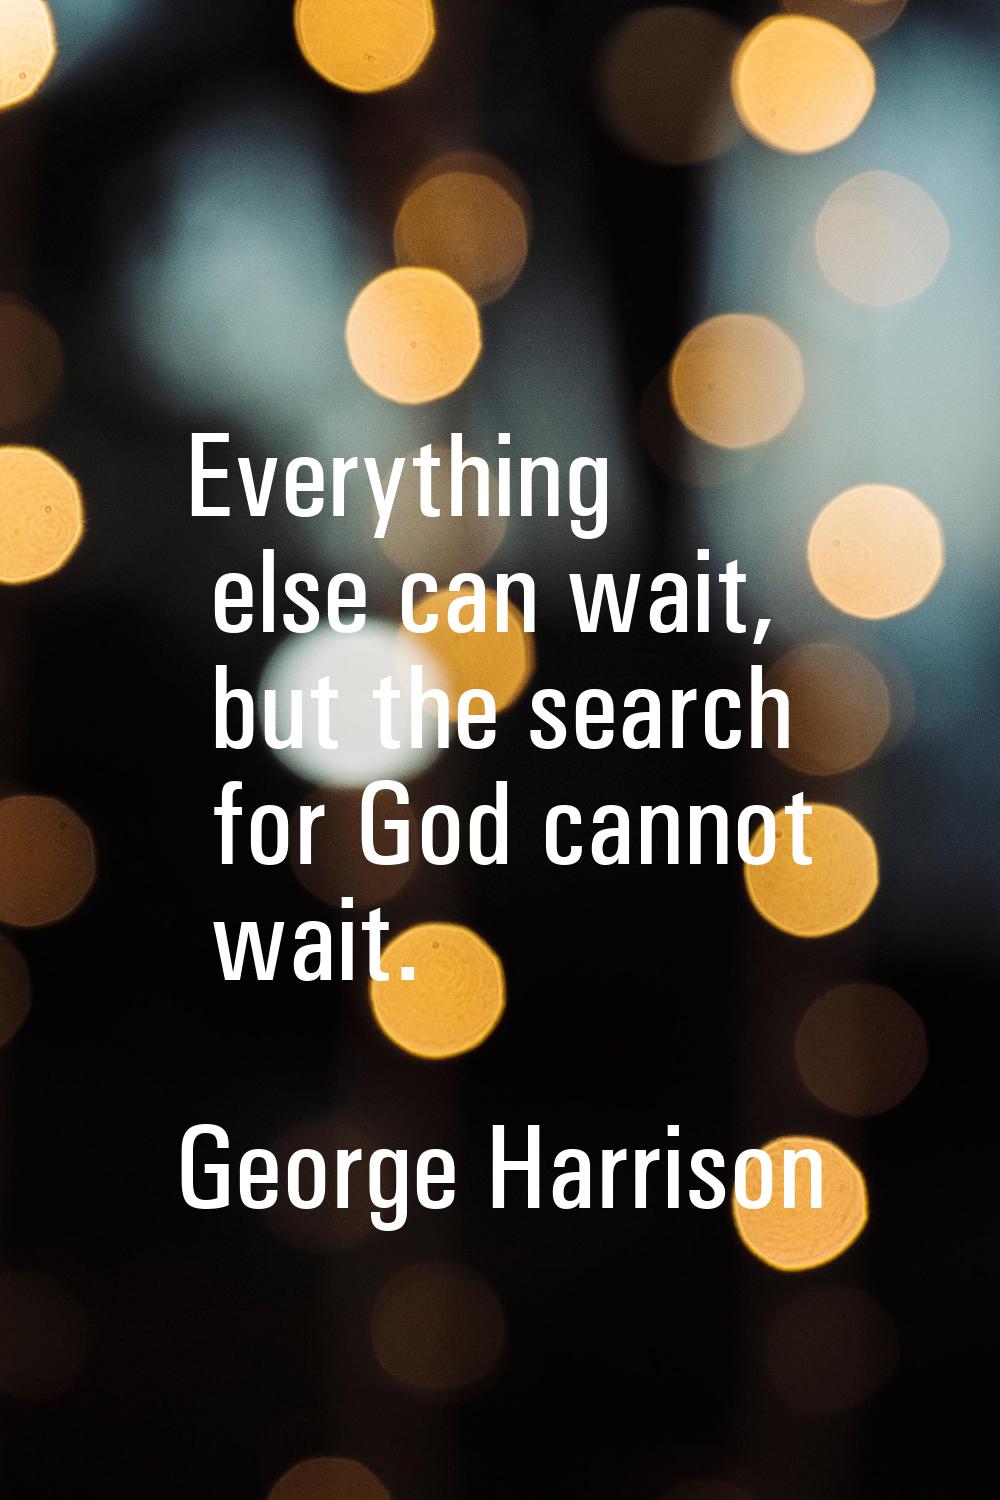 Everything else can wait, but the search for God cannot wait.